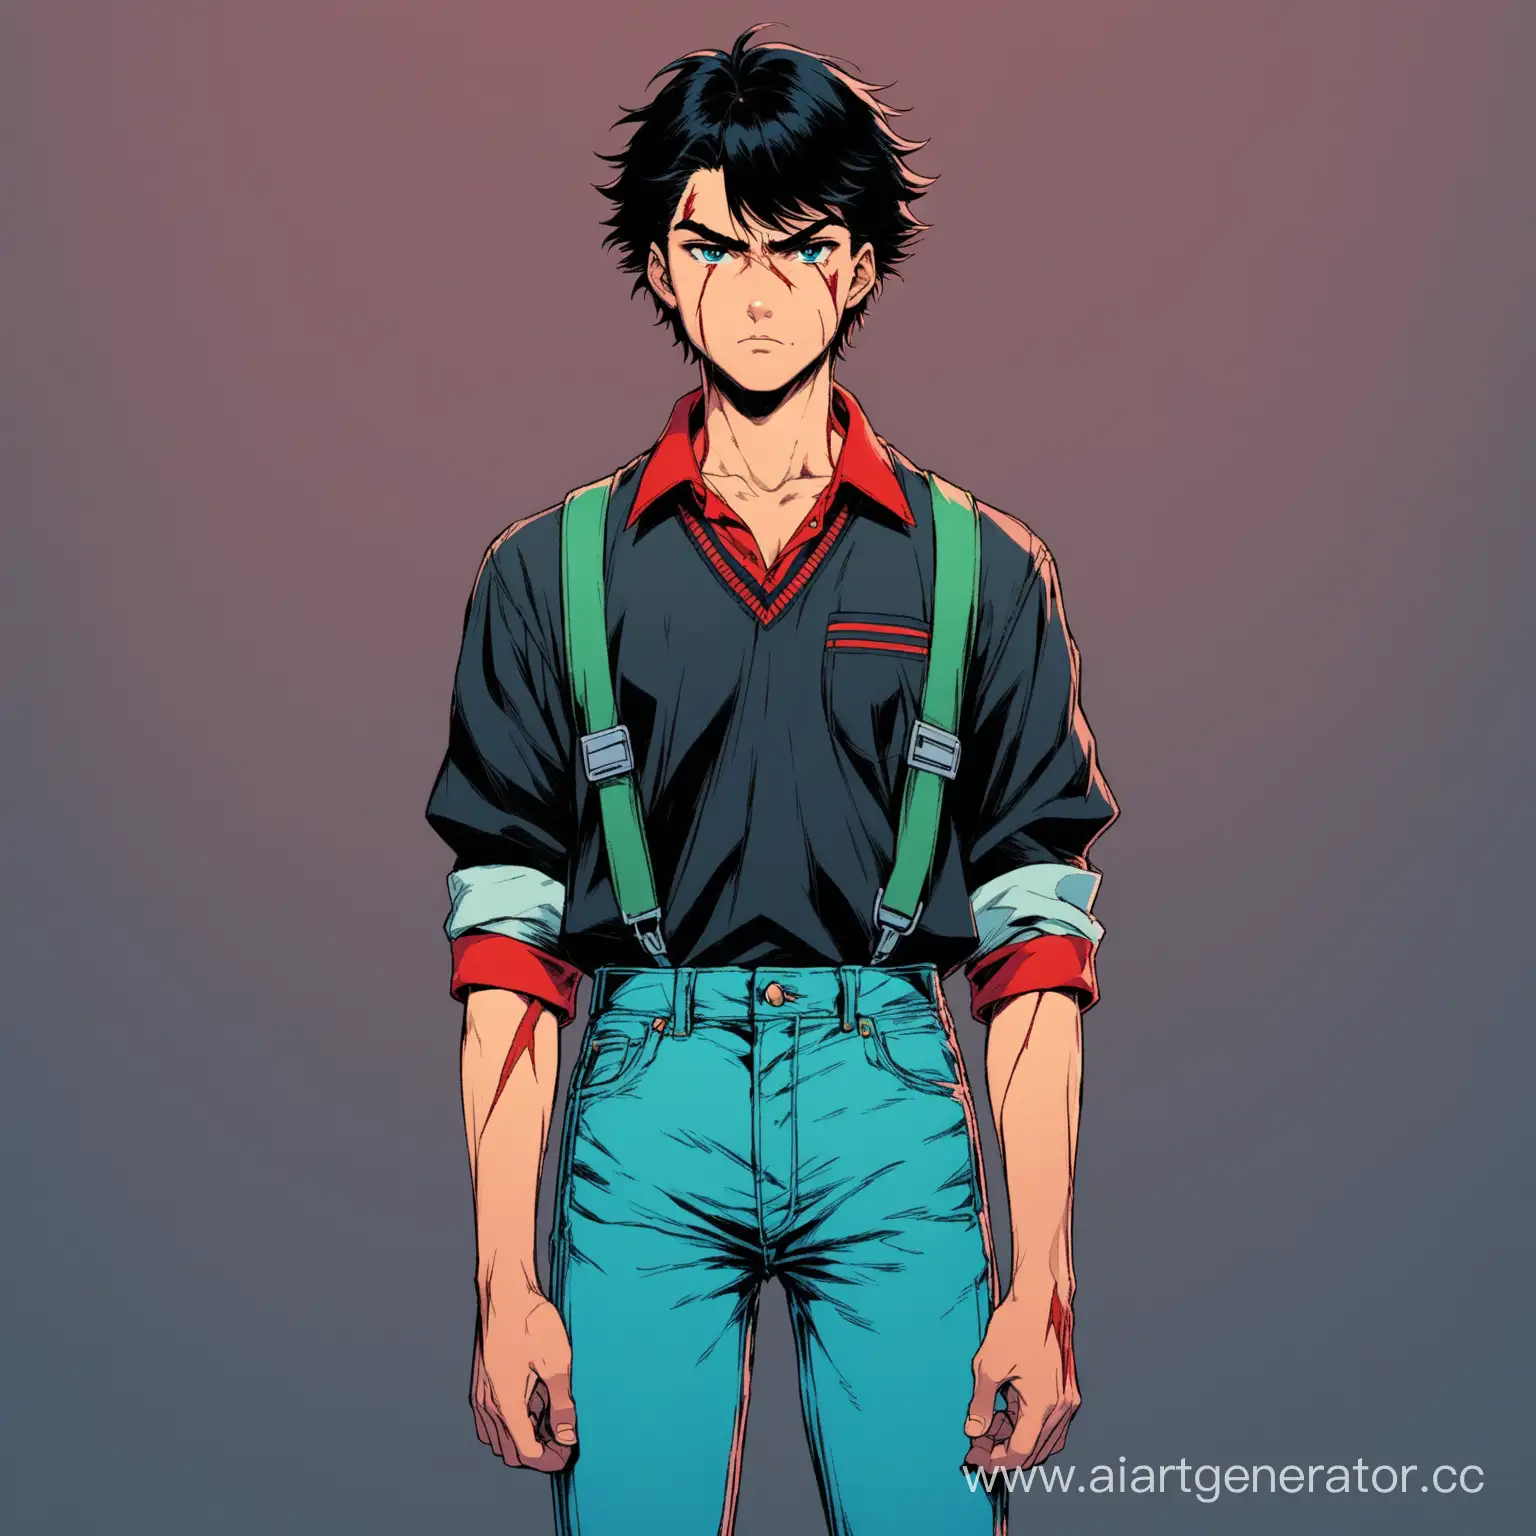 Serious-Tall-Guy-with-80s-Style-School-Uniform-and-Scar